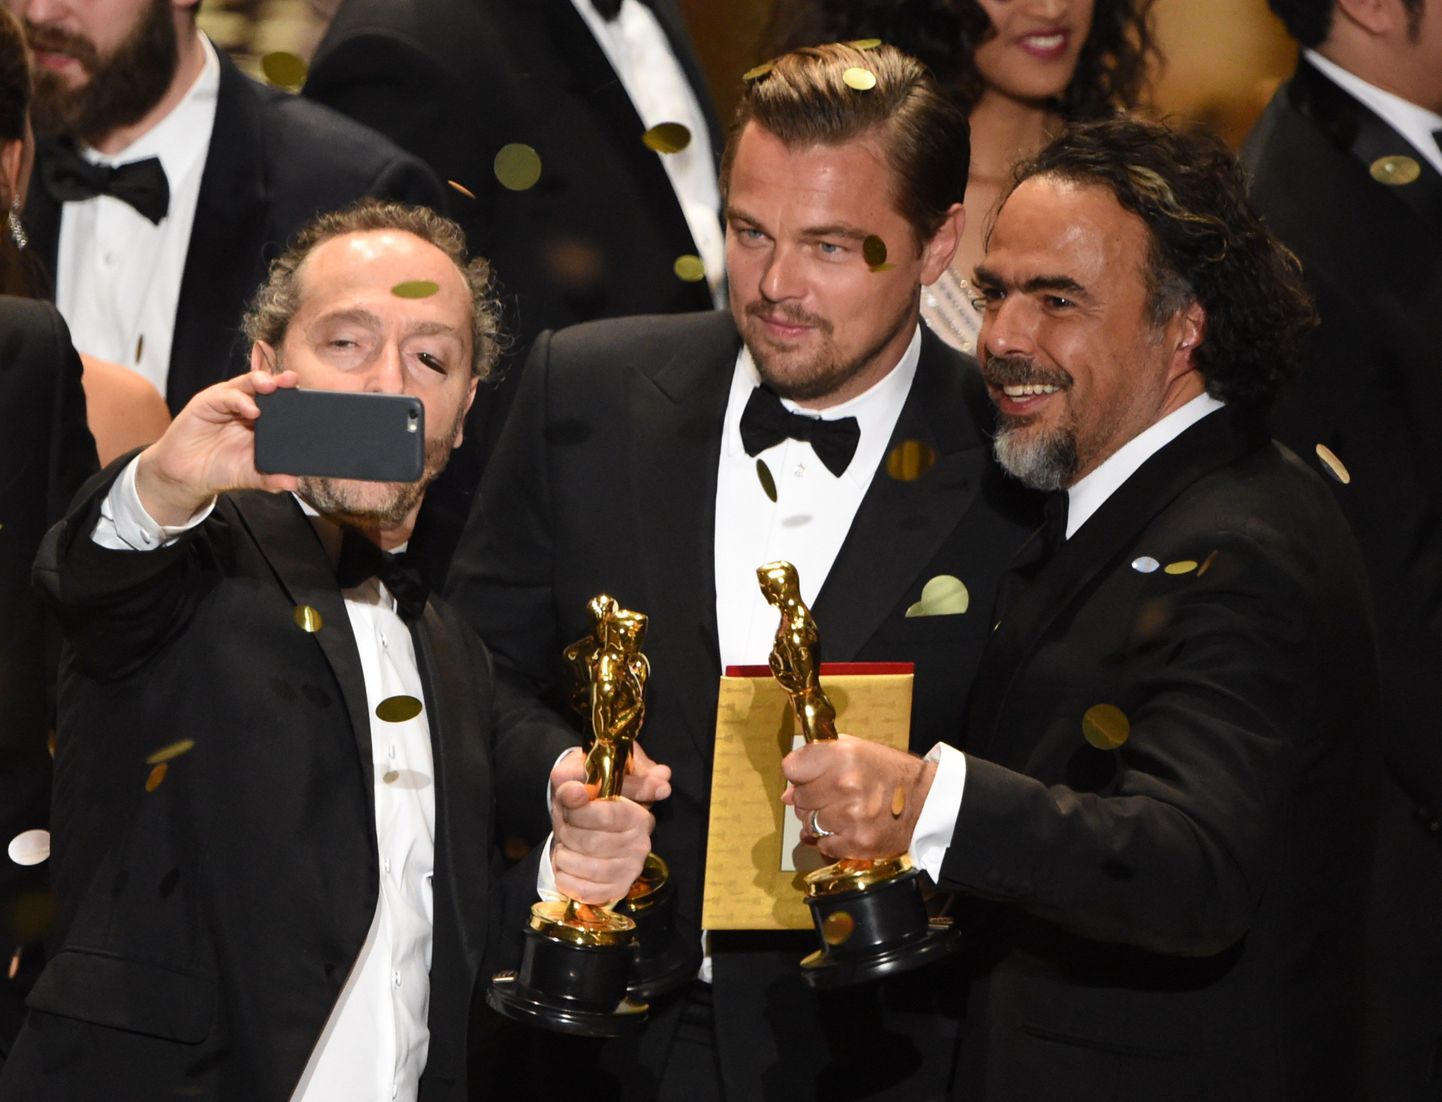 Cinematographer Emmanuel Lubezki (L) , Actor Leonardo DiCaprio (C) and Director Alejandro Gonzalez Inarritu take a selfie with their awards on stage at the 88th Oscars on February 28, 2016 in Hollywood, California. AFP PHOTO / MARK RALSTON